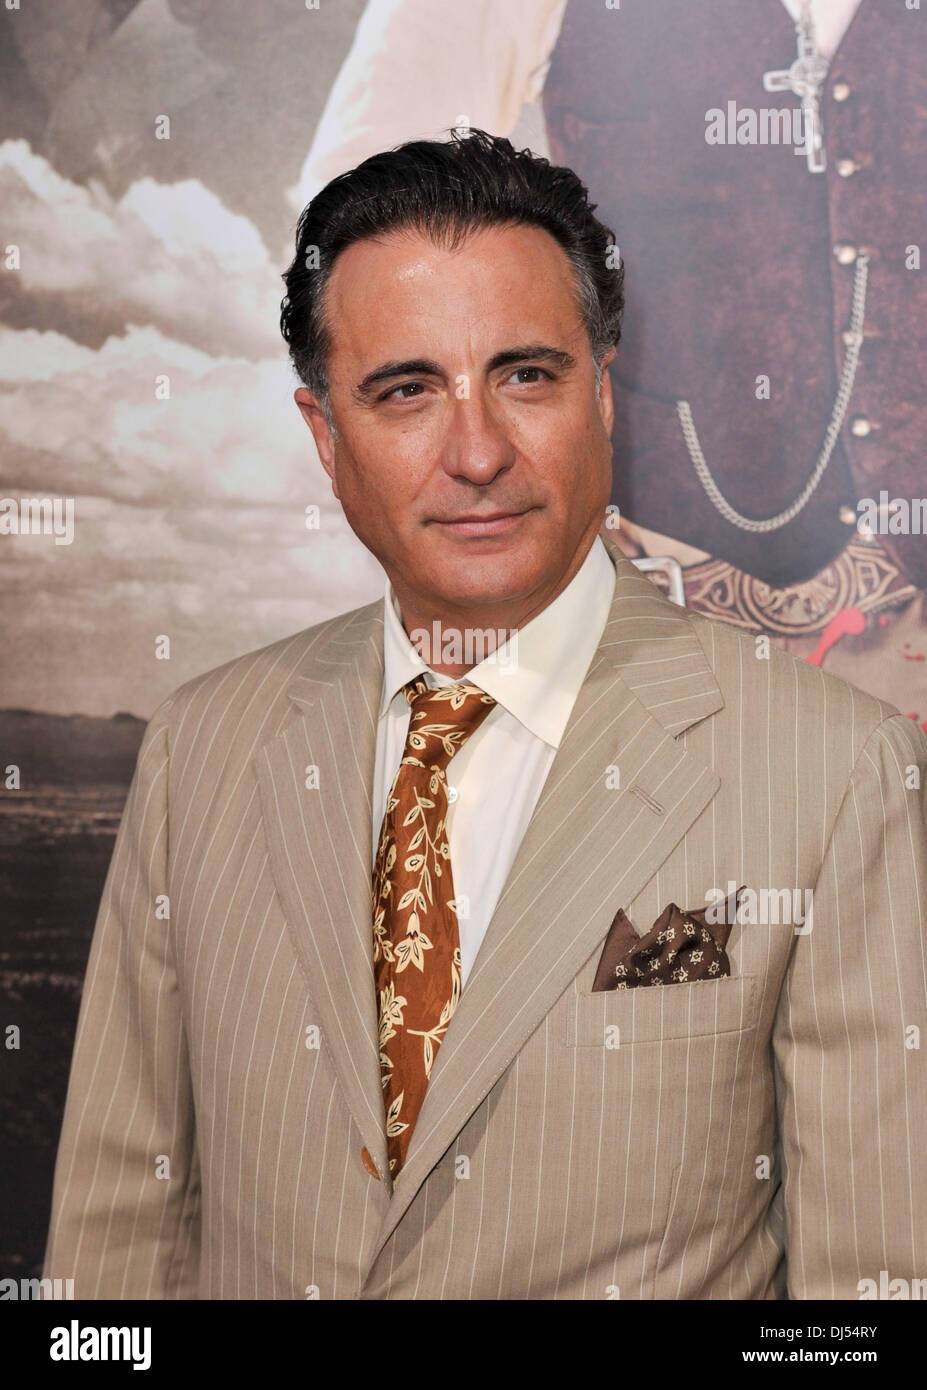 Andy Garcia Premiere Of ARC Entertainment's 'For Greater Glory' - Arrivals at the Samuel Goldwyn Theater Beverly Hills, California - 31.05.12 Stock Photo